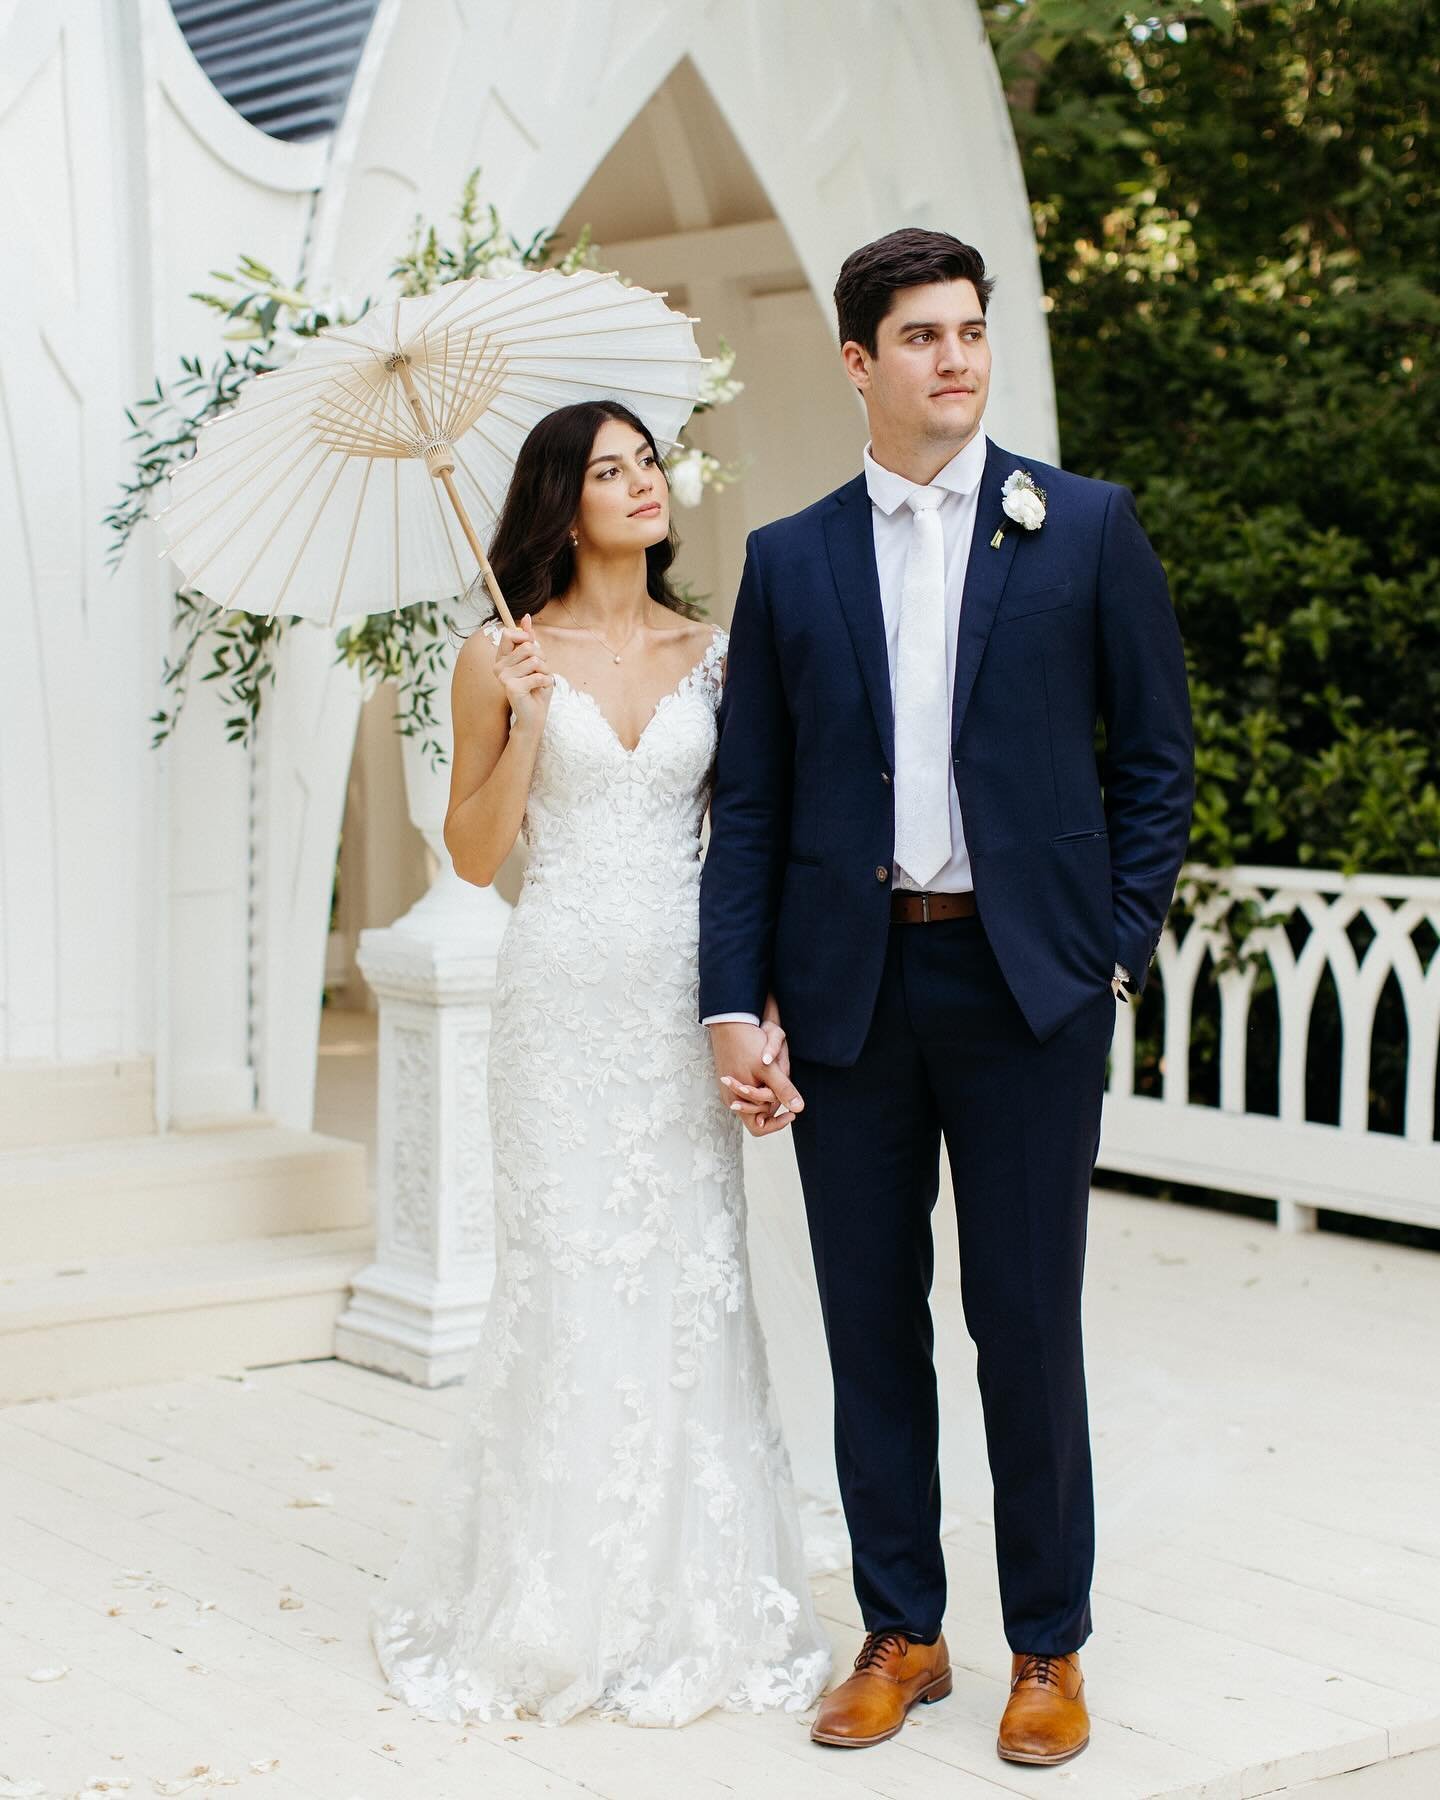 A gorgeous and whimsical May wedding at @thewildflower301 🦋✨ #HEIRLOOMFOTO

⭐️ TEAM ⭐️

Makeup: @bridalbeautyauthority Venue: @thewildflower301 planning and design: @lauraburchfieldevents @sydneywoodz linens: @idolinens dress: @idobridalathens 
Flor